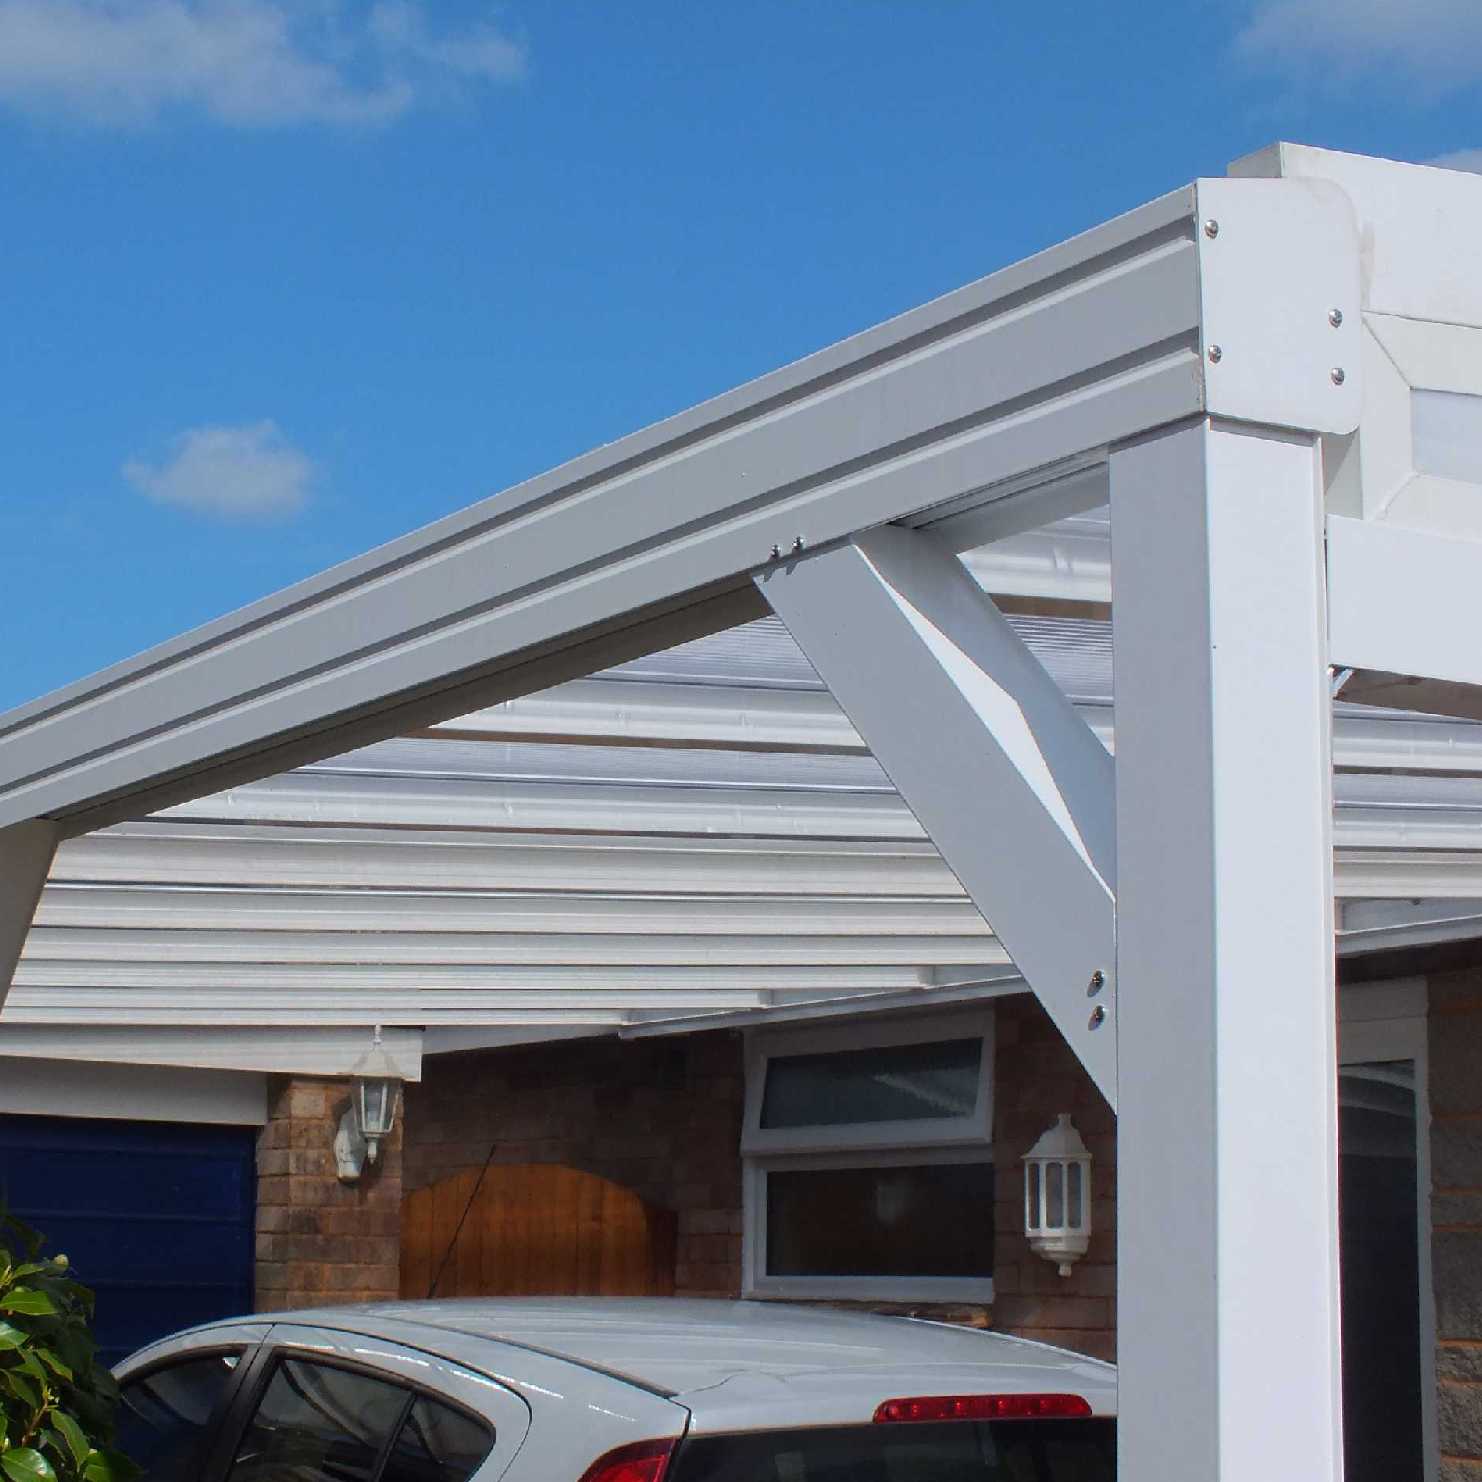 Buy Omega Smart Lean-To Canopy, White with 16mm Polycarbonate Glazing - 4.9m (W) x 3.5m (P), (3) Supporting Posts online today